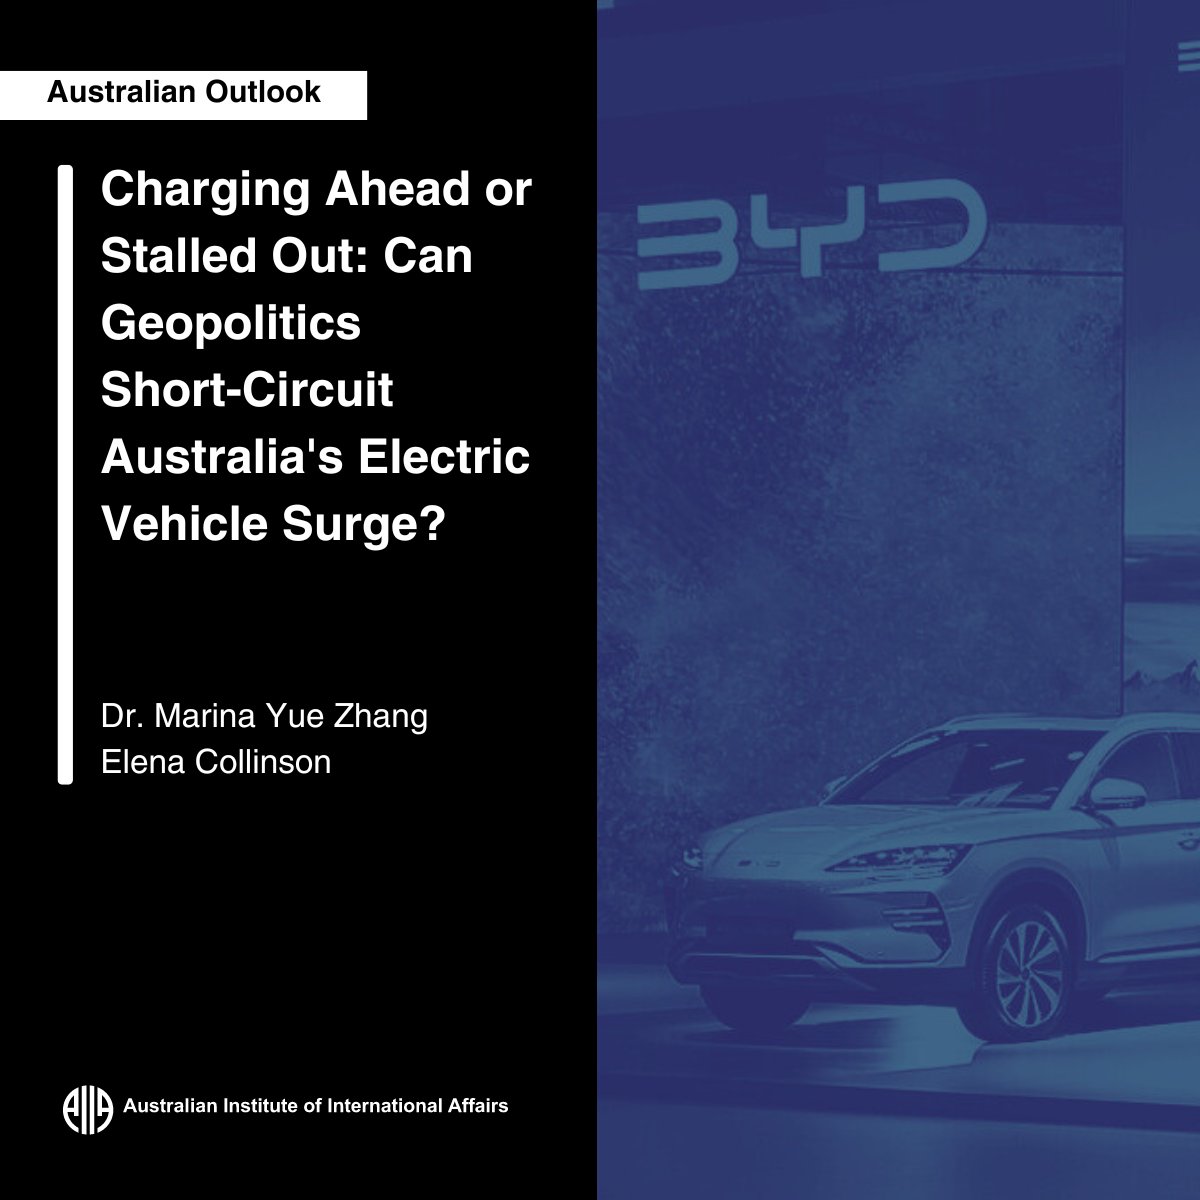 “As Australia belatedly increases its uptake of electric vehicles, its relationship with China is vitally important. Can it manoeuvre geopolitical considerations?” discussed by Dr. Marina Yue Zhang and Elena Collinson Read more at Australian Outlook👇 ow.ly/VlwO50R0tiZ